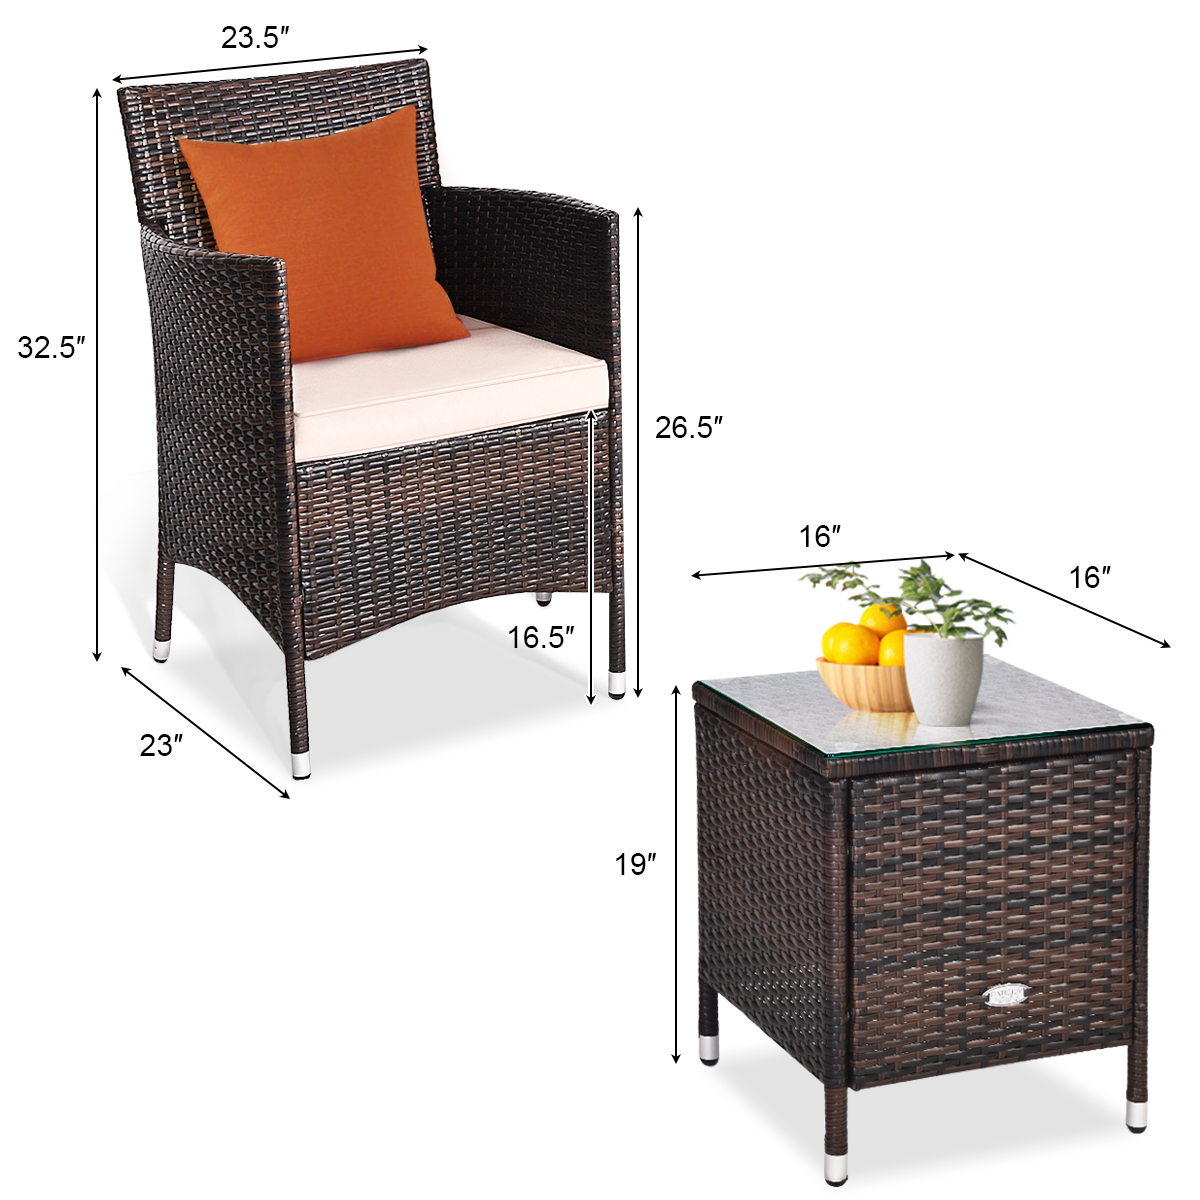 Gymax 3PCS Patio Rattan Chair & Table Furniture Set Outdoor w/ Beige Cushion - image 5 of 10